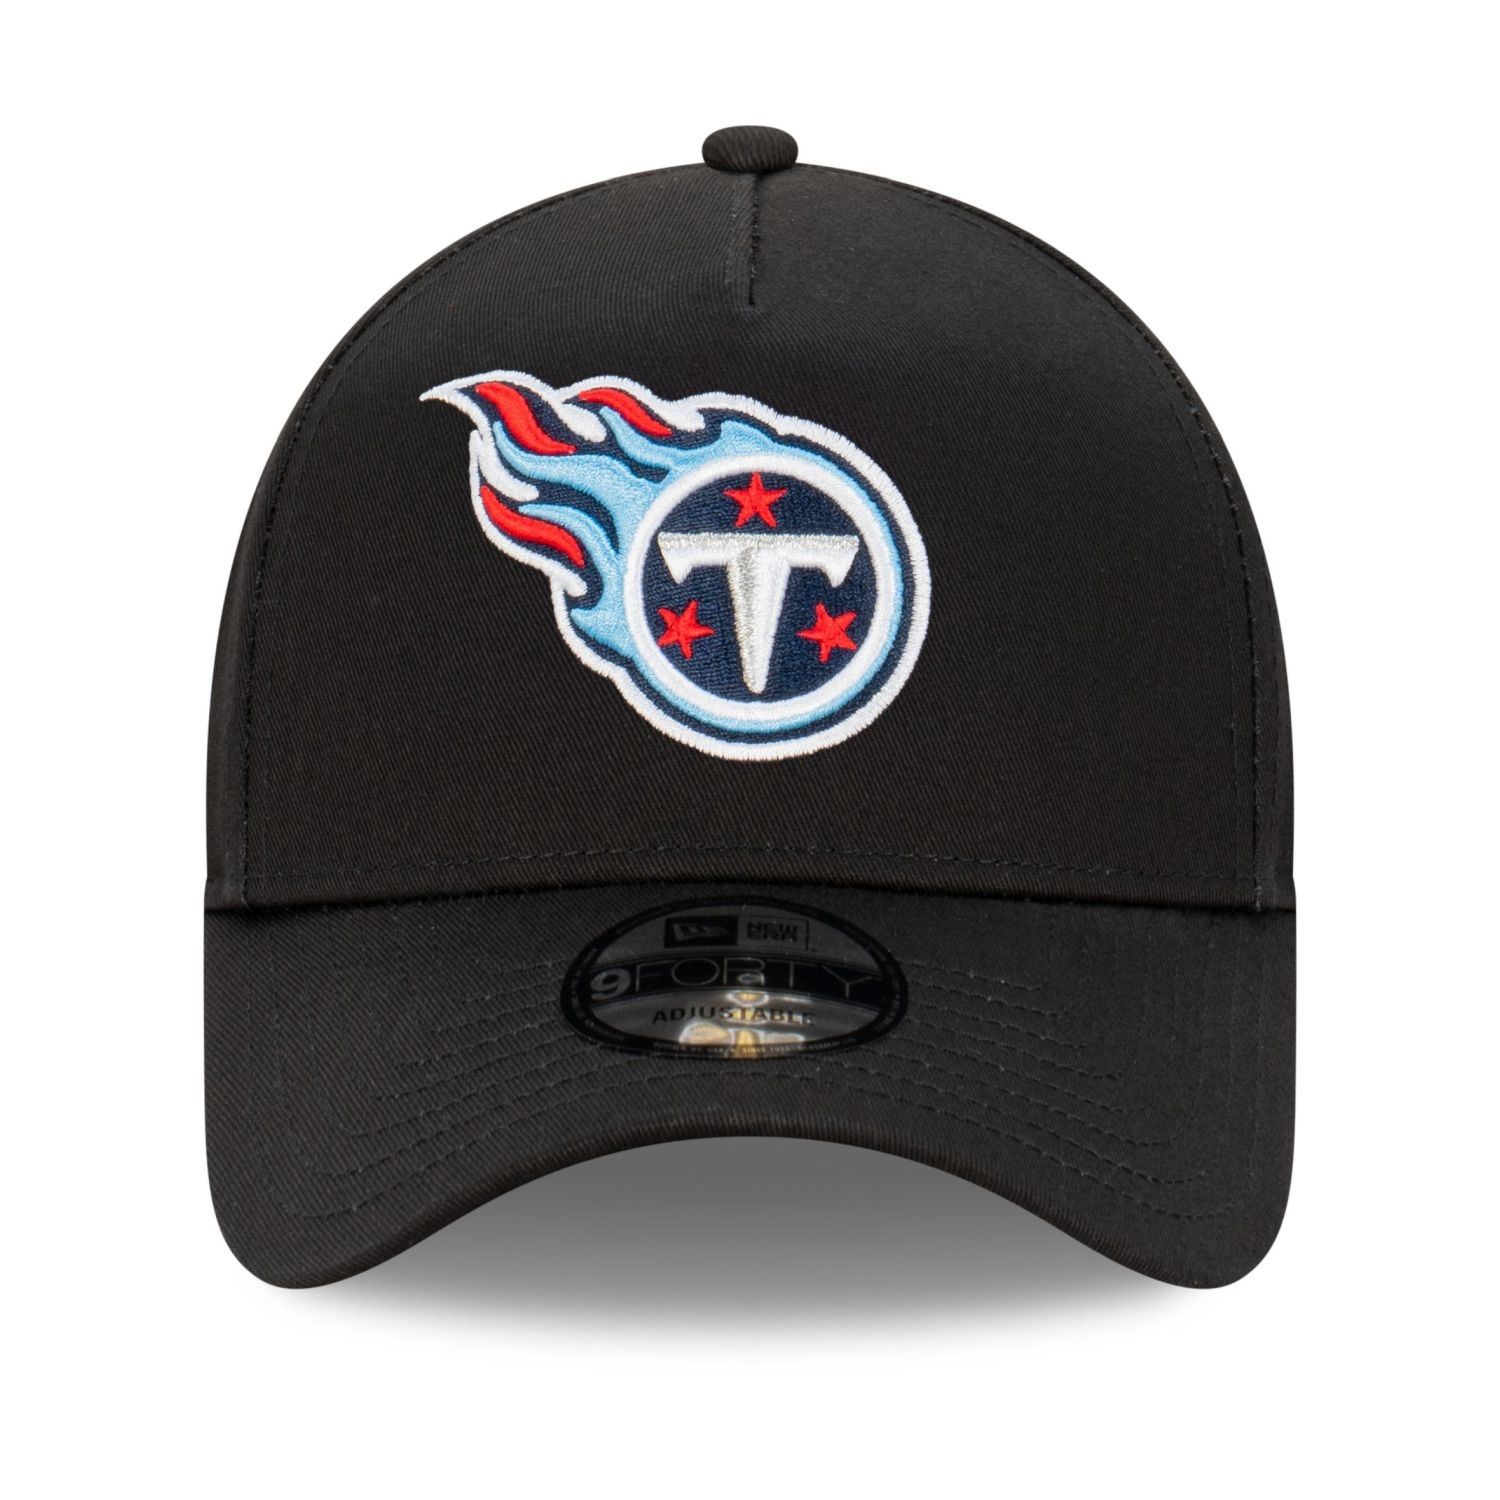 Tennessee Titans NFL Evergreen Black 9Forty Adjustable A-Frame Cap New Era